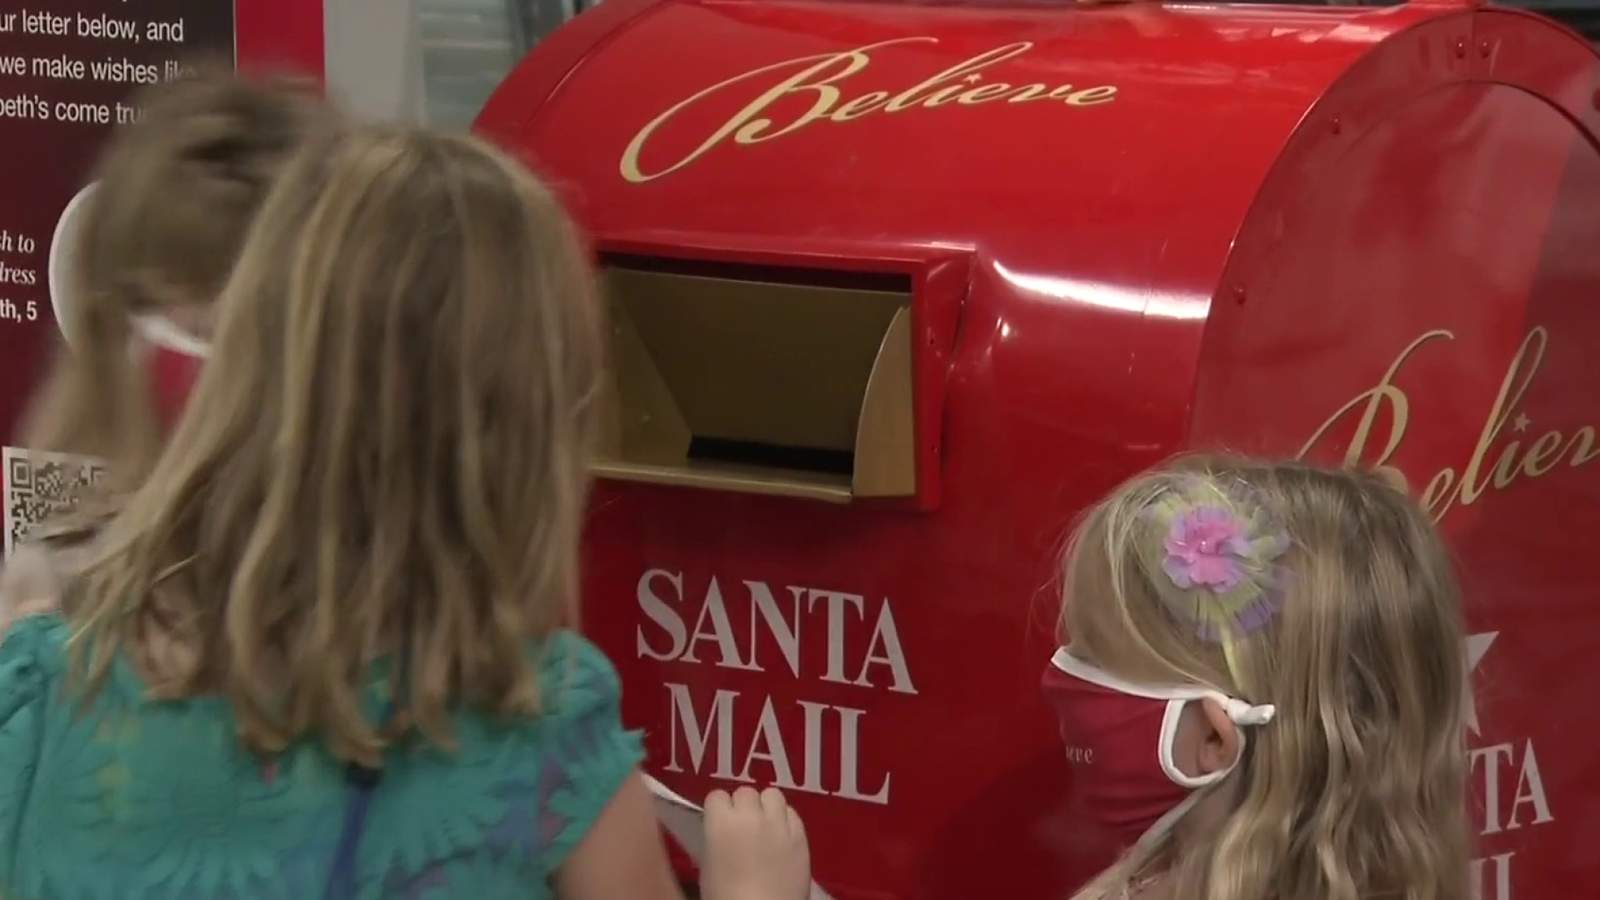 How your child’s letter to Santa can raise money for Make-A-Wish